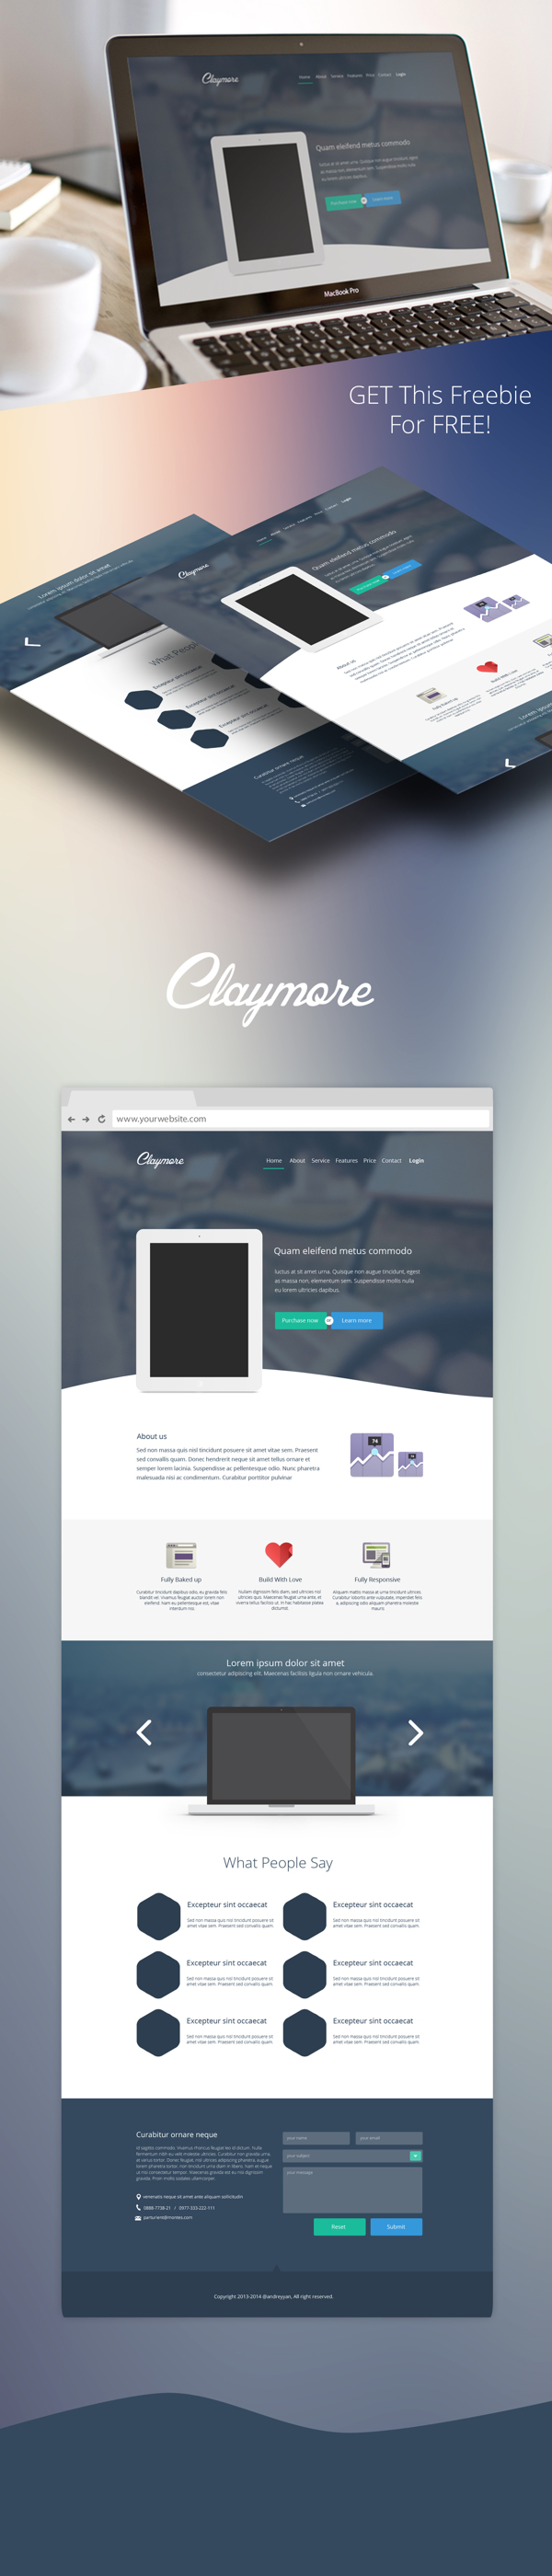 Claymore - App Landing Page